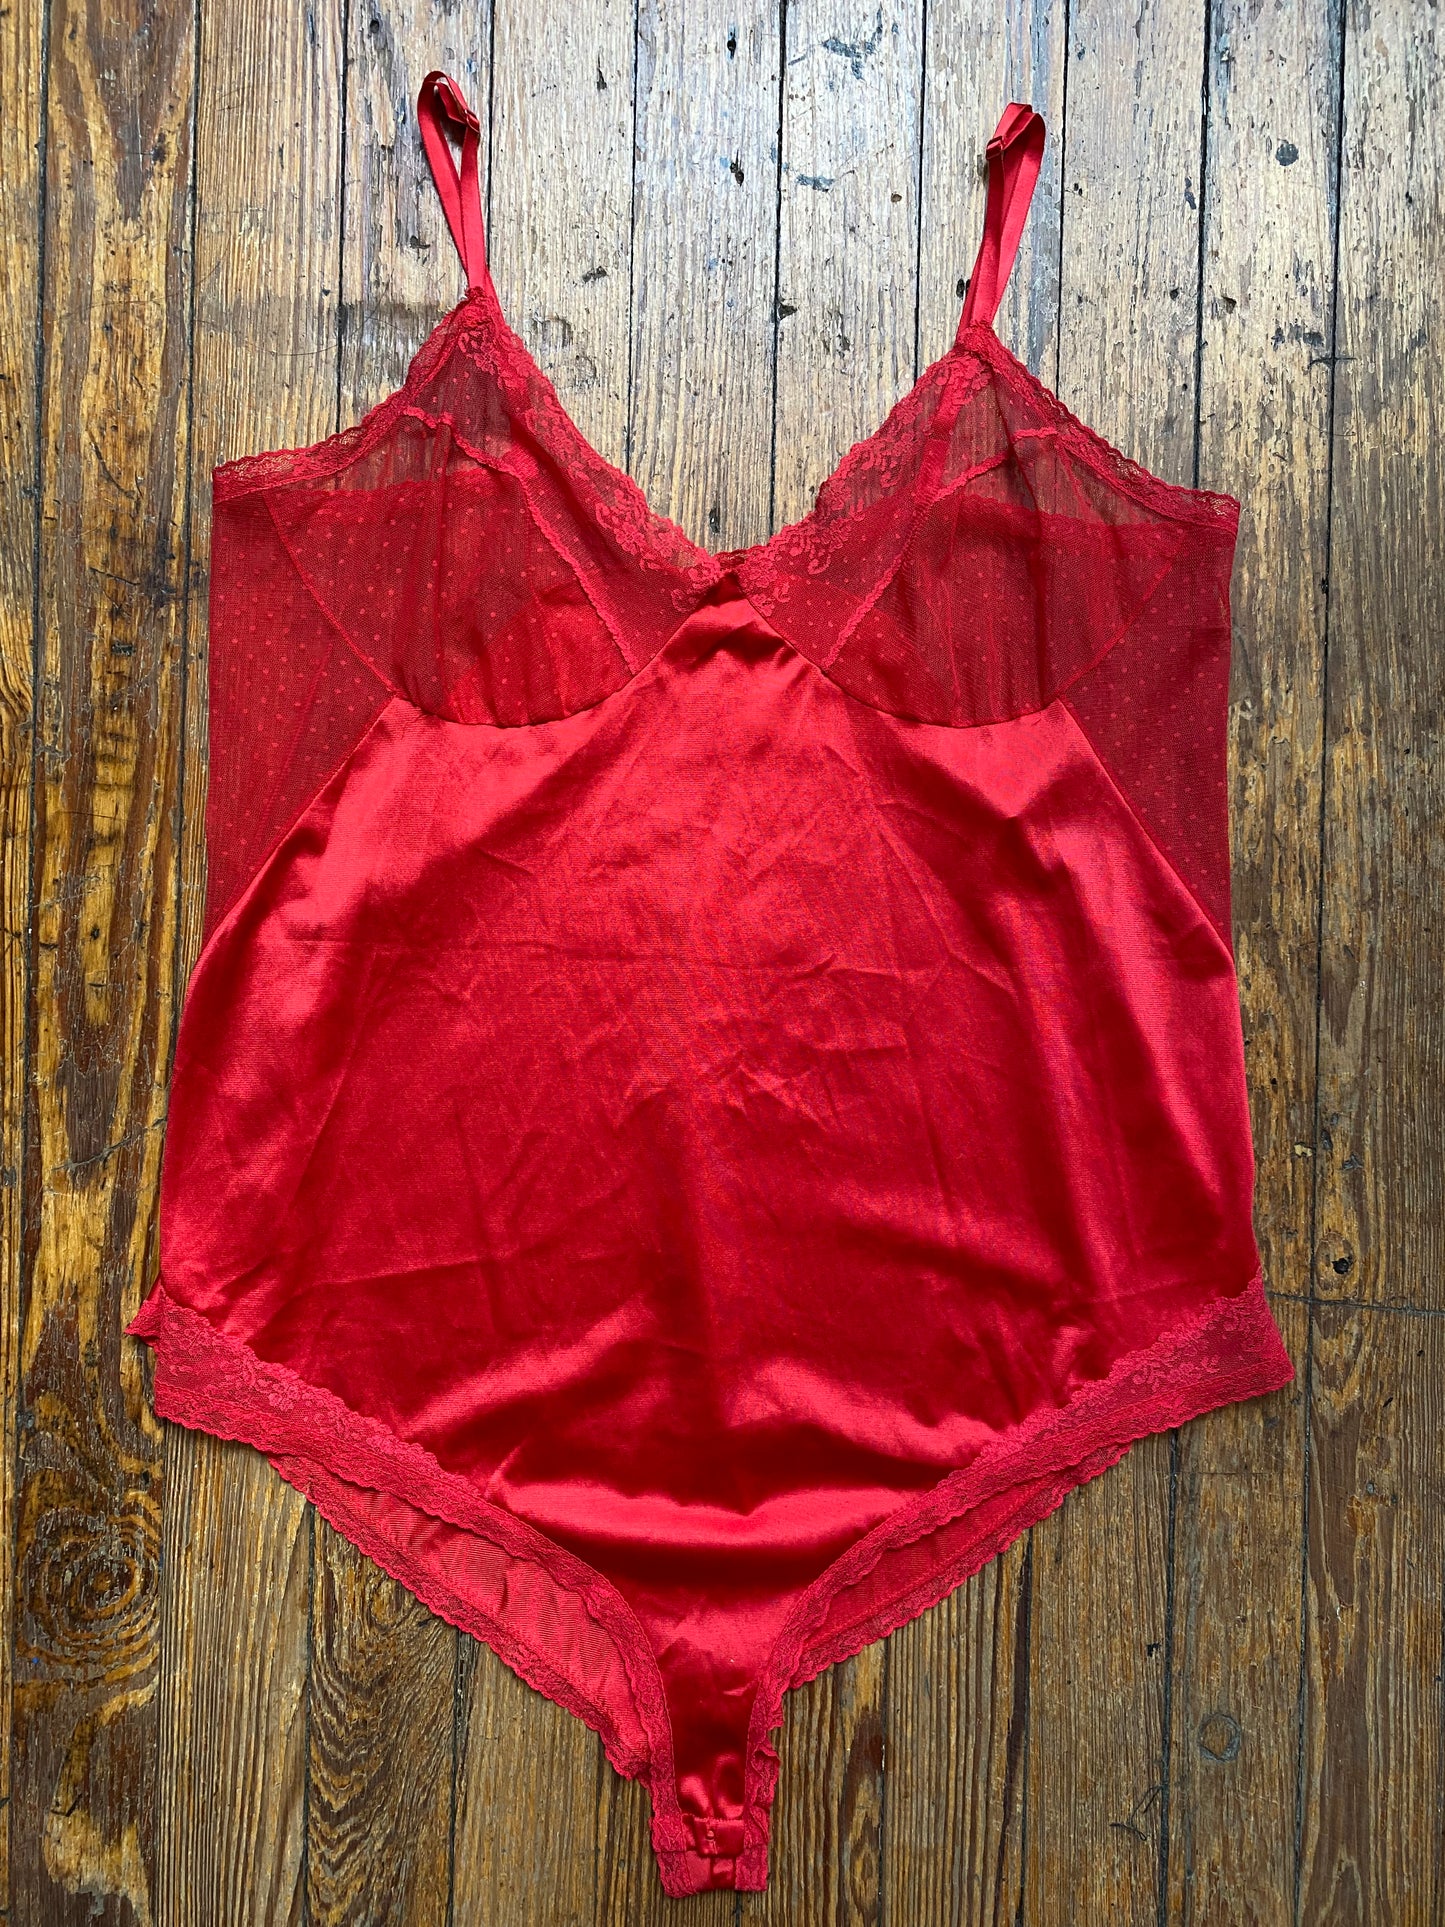 Vintage Red Satin & Lace Teddy